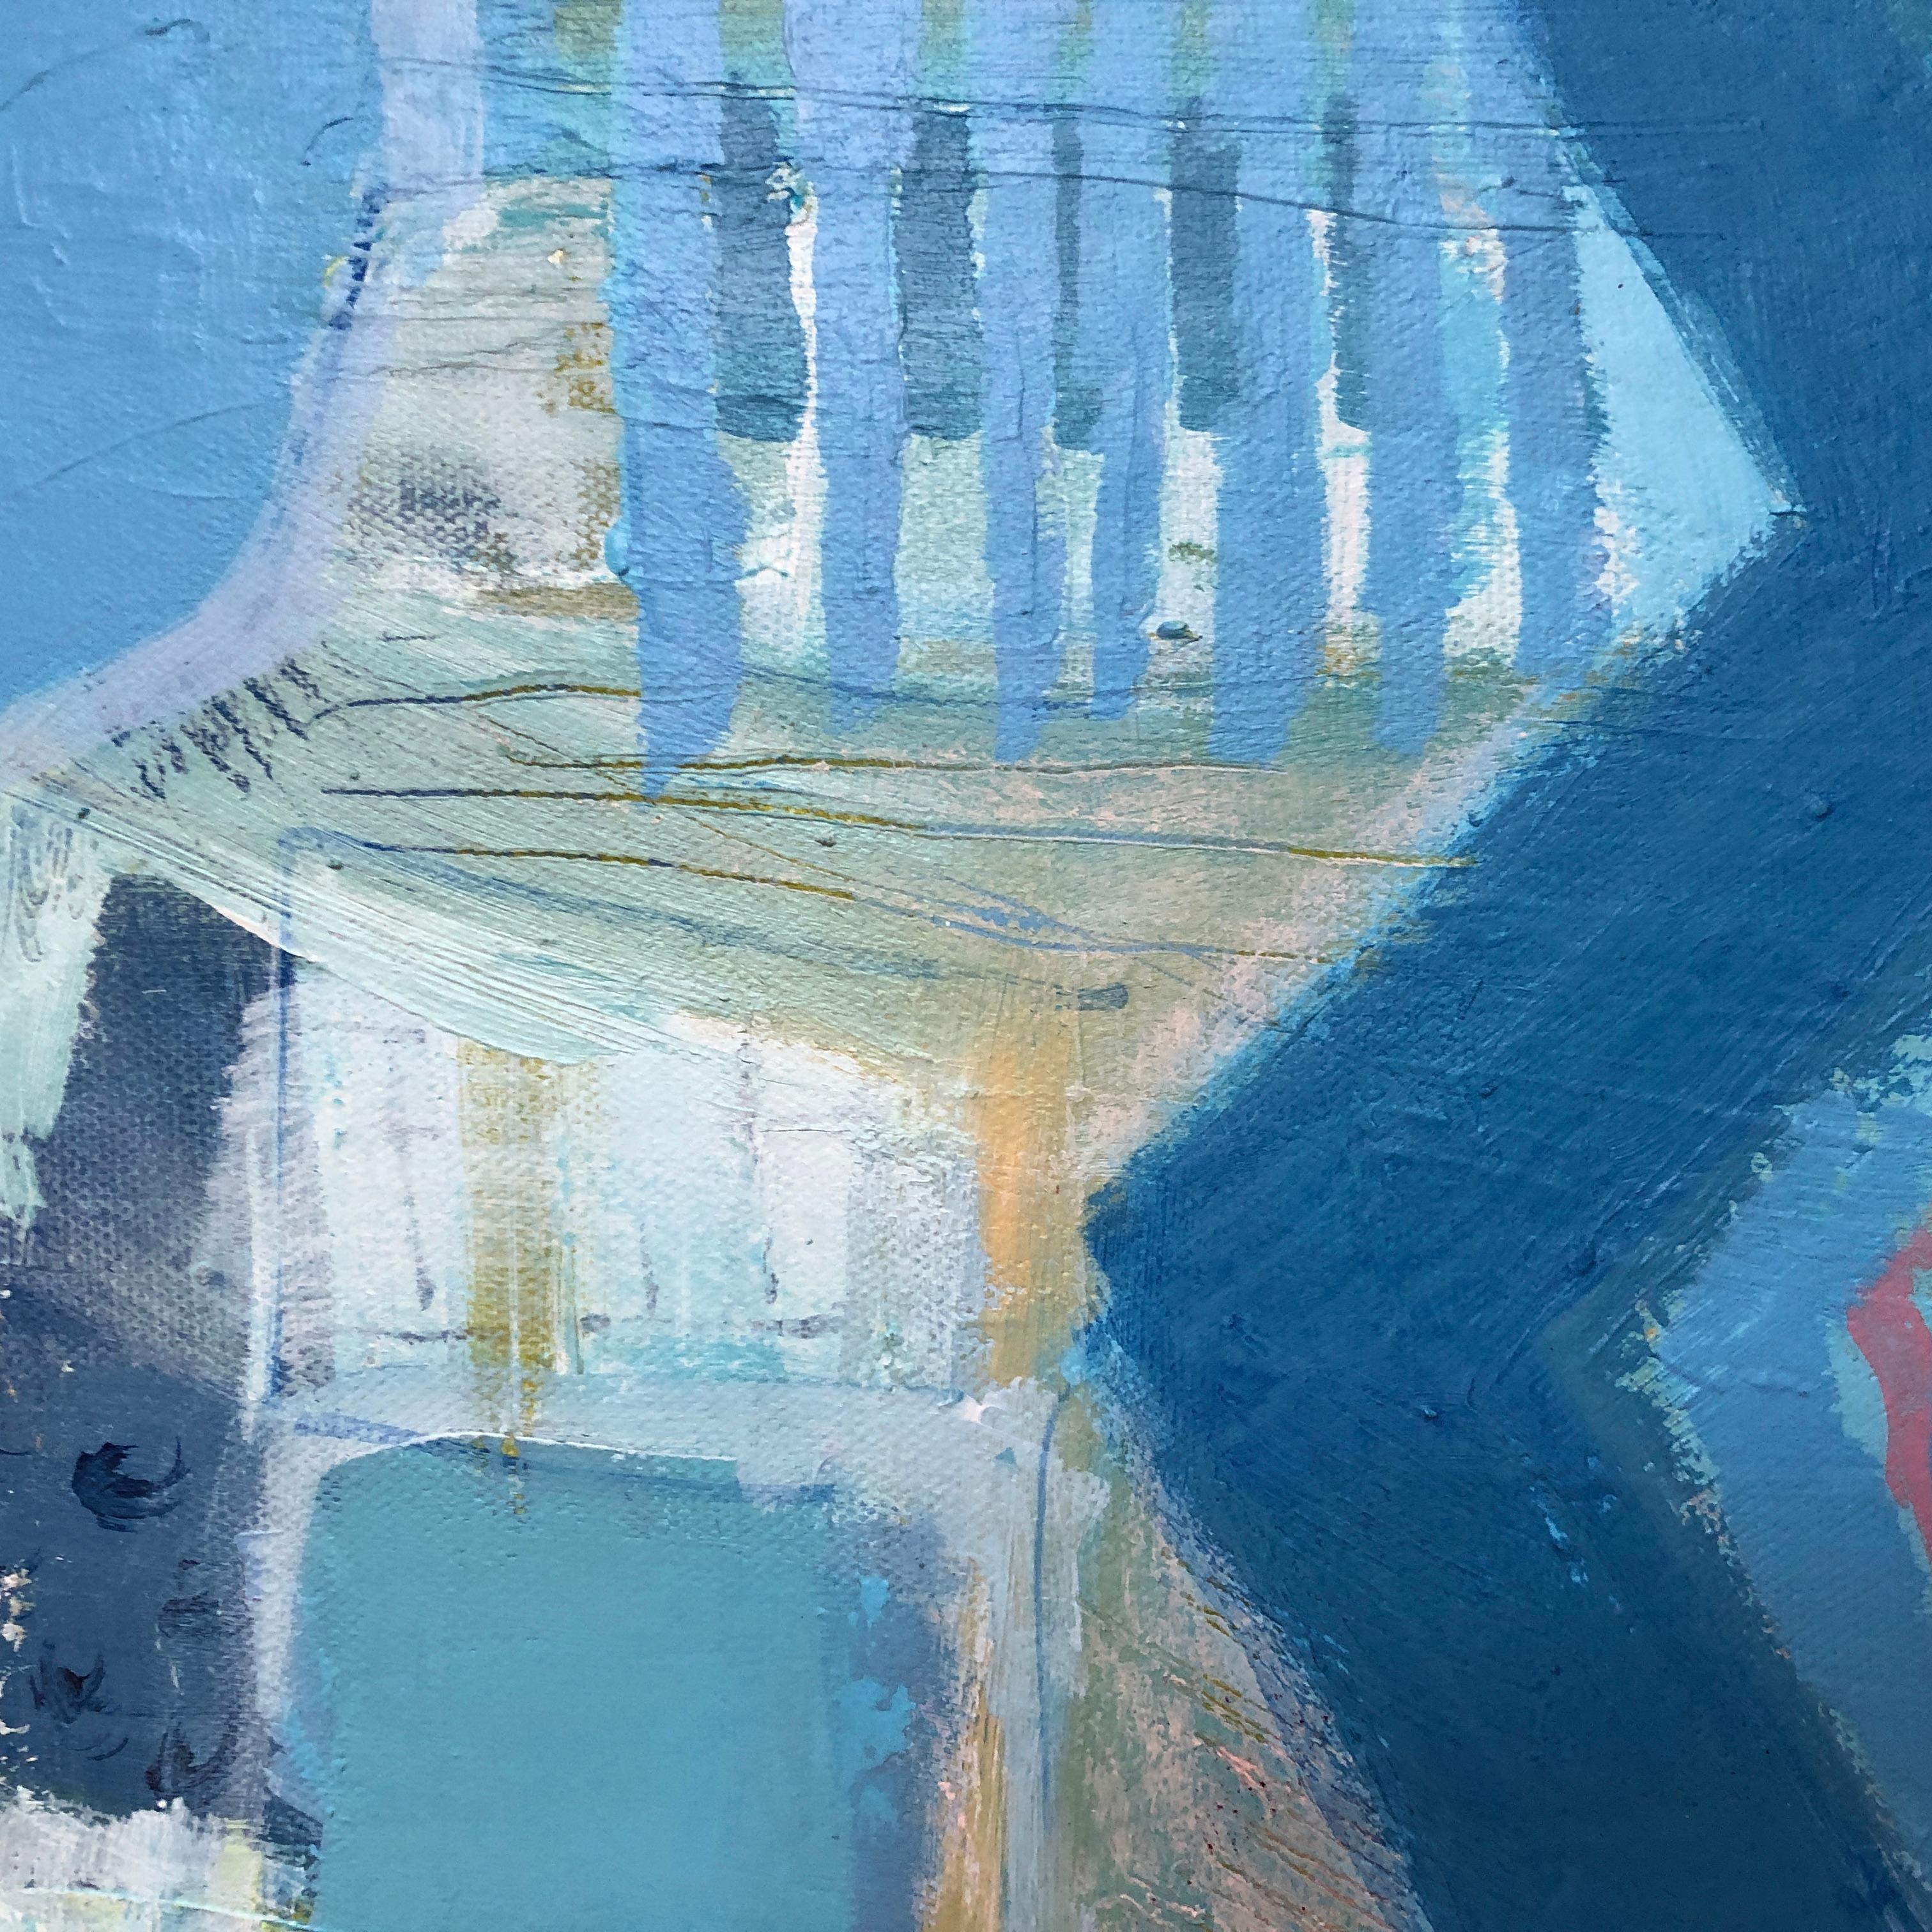 From the train nearly home, Original painting, Abstract, Still life inspired  - Painting by Maggie LaPorte Banks